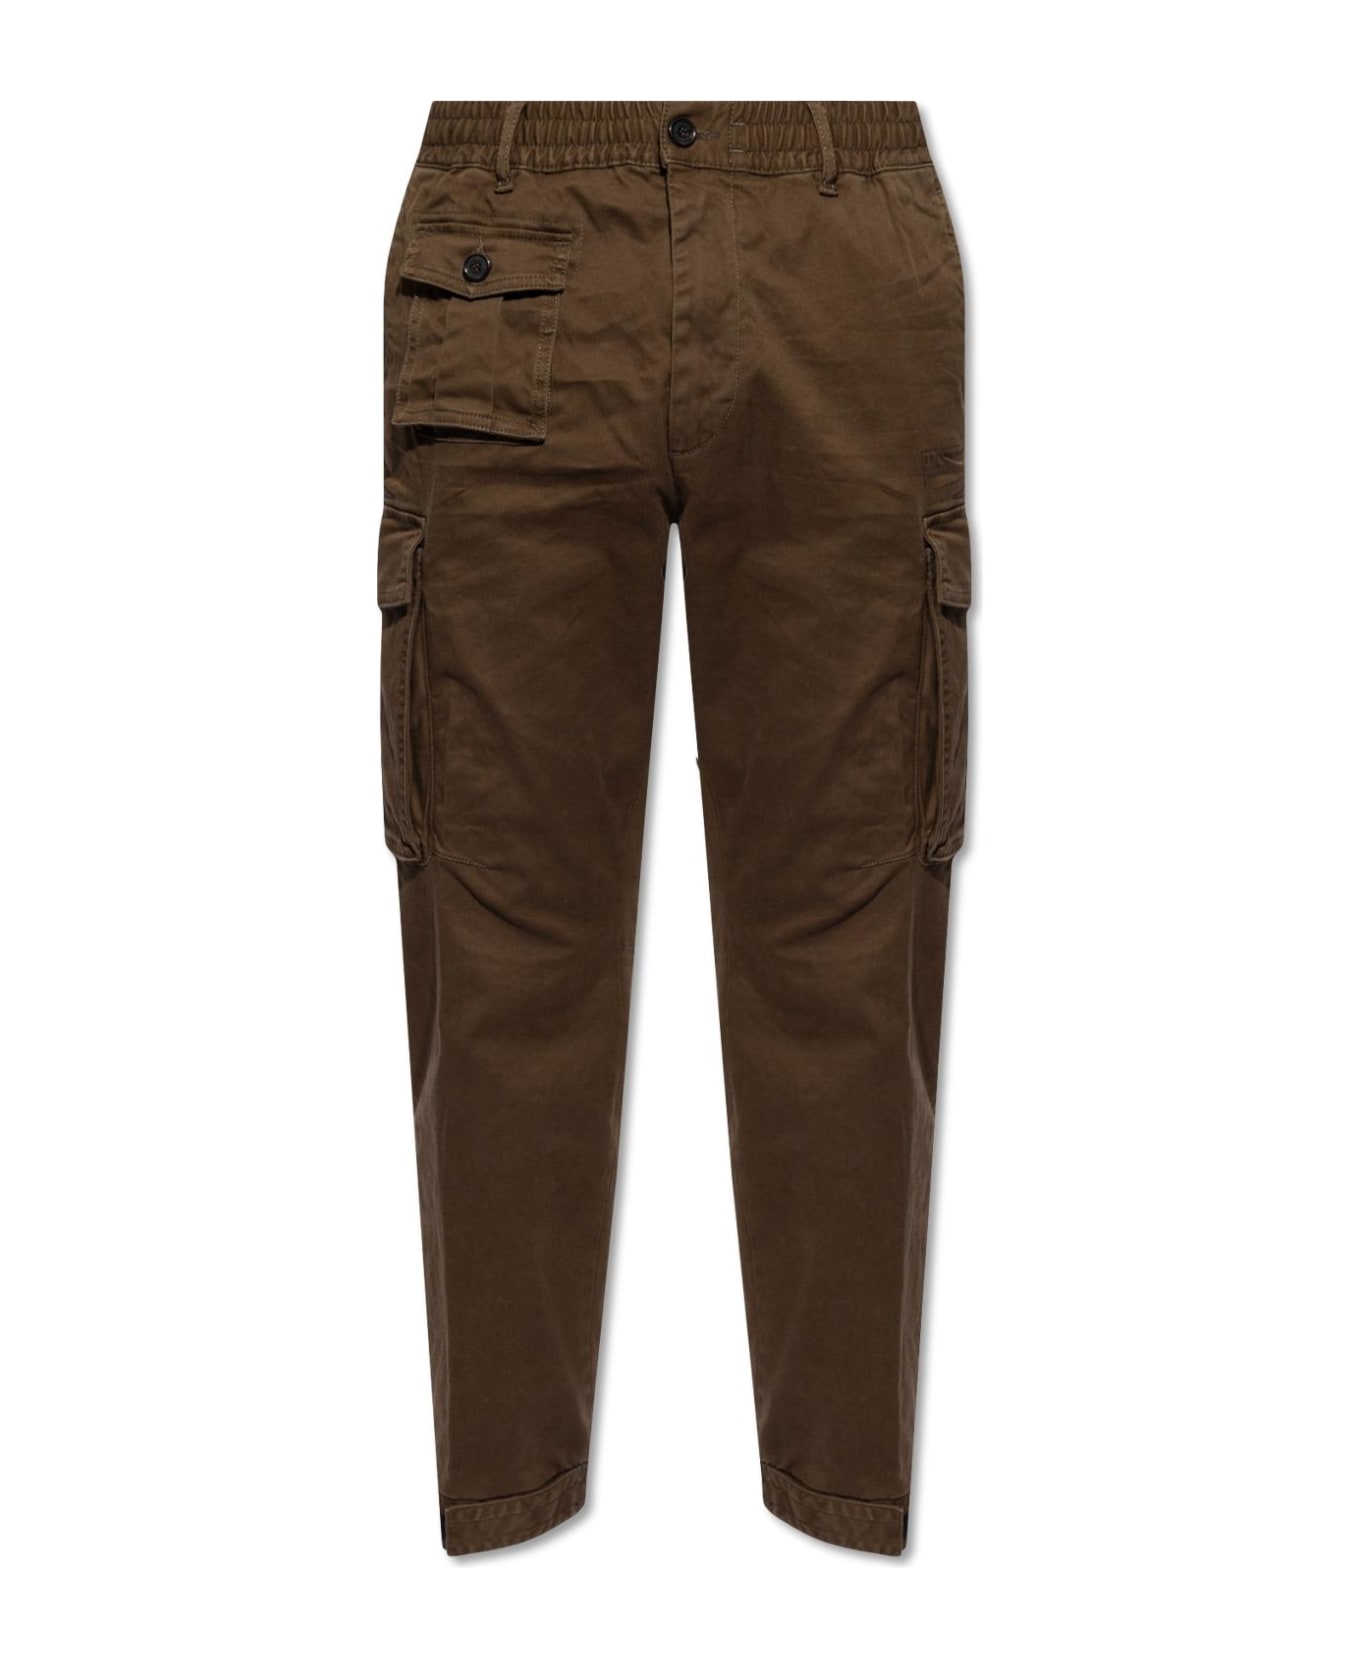 Dsquared2 Trousers With Pockets - Verde militare